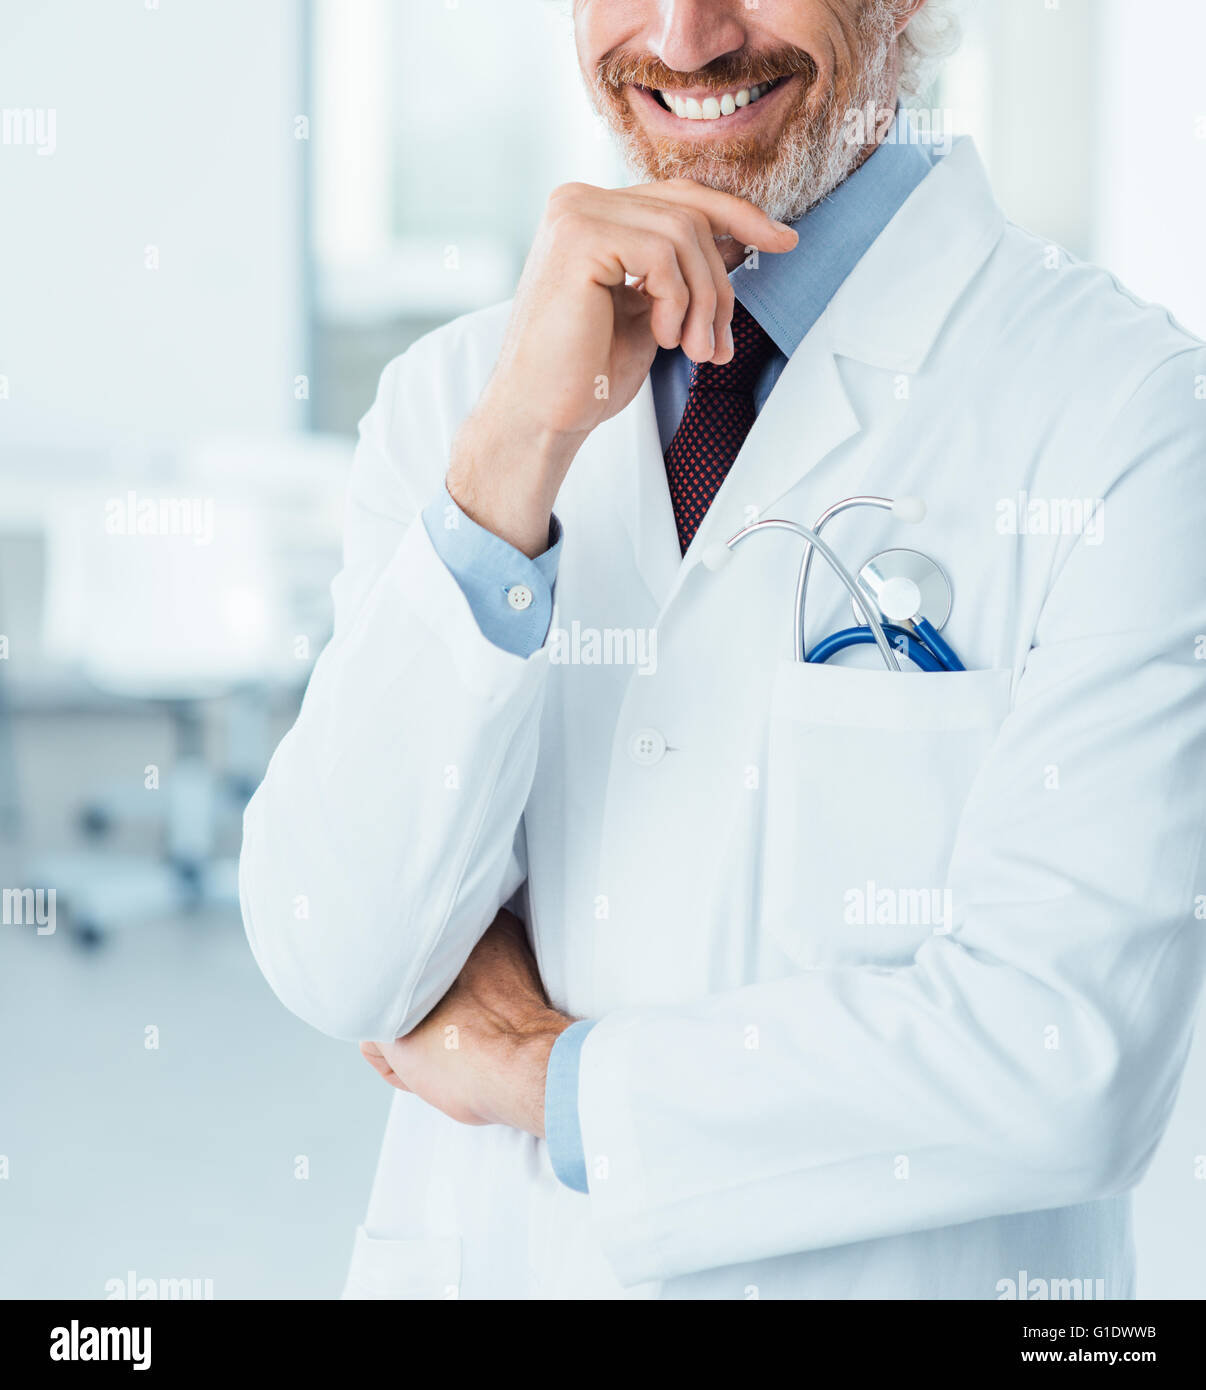 Professional doctor posing at hospital and smiling at camera with hand on chin Stock Photo